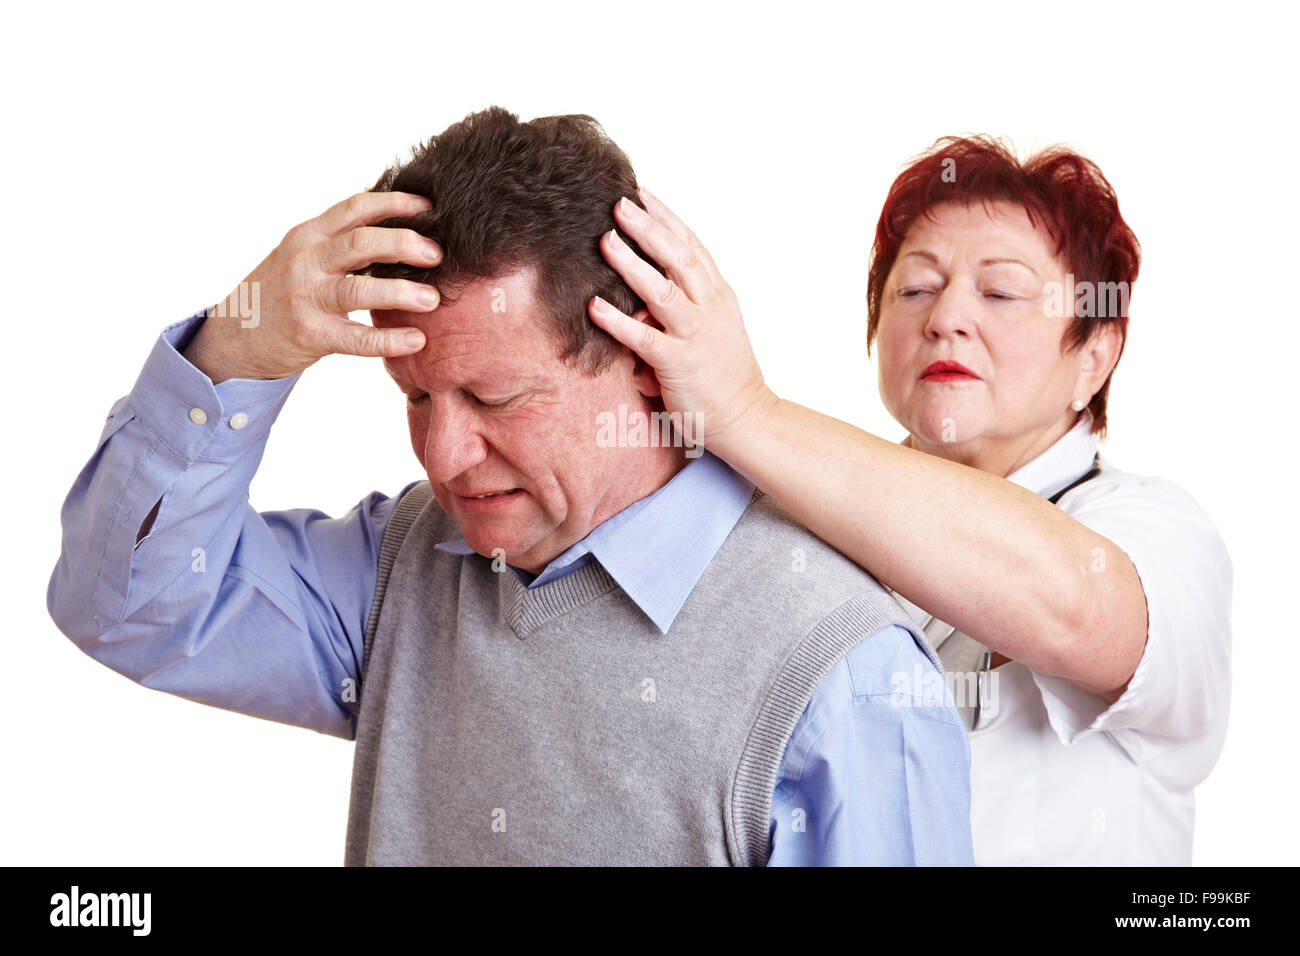 Man with migraine seeing a doctor for an examination Stock Photo